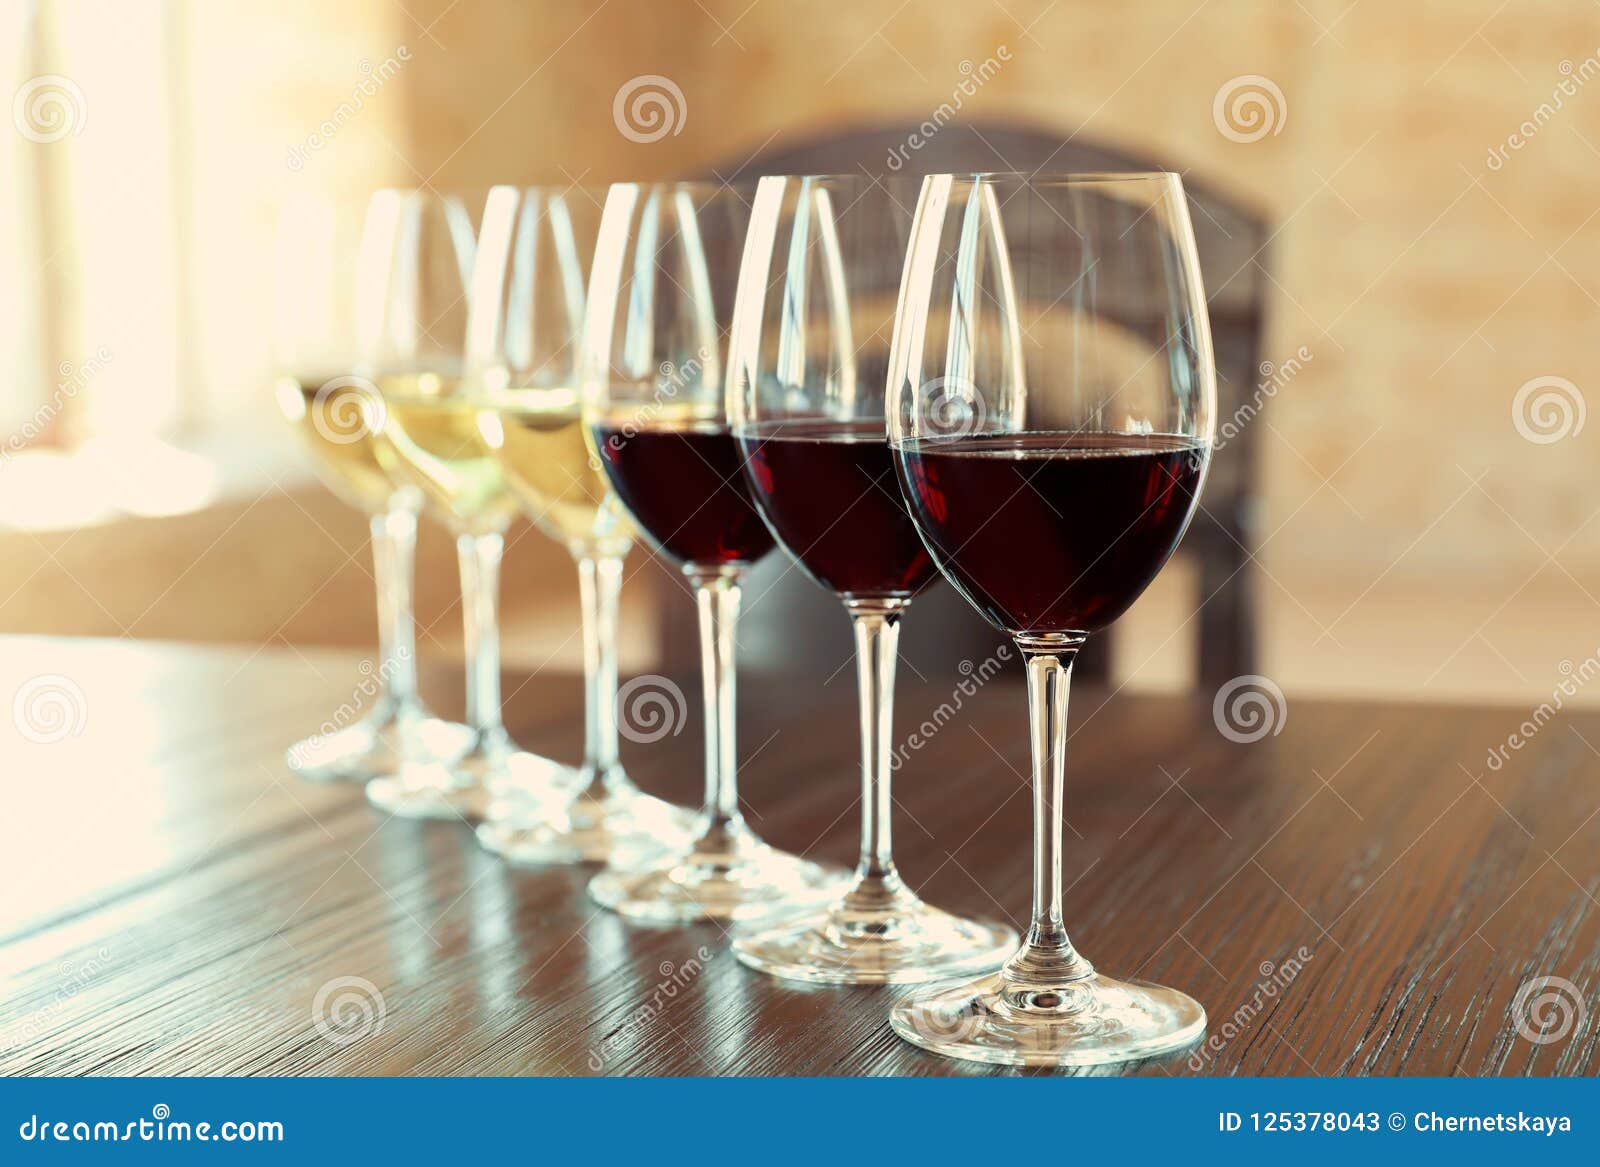 glasses of white and red wines